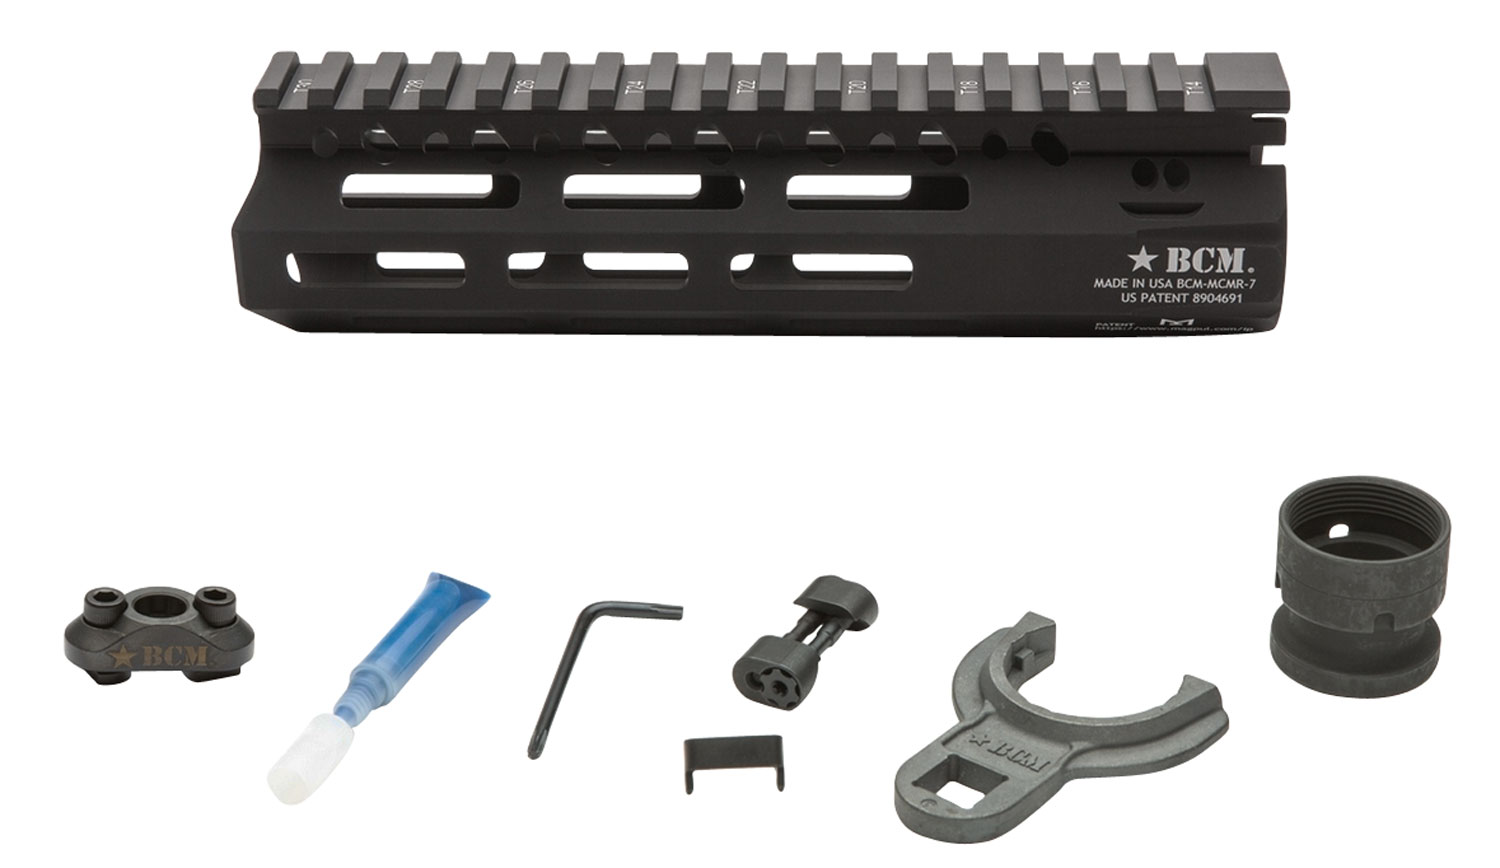 BCM MCMR7556BLK BCMGunfighter MCMR 7